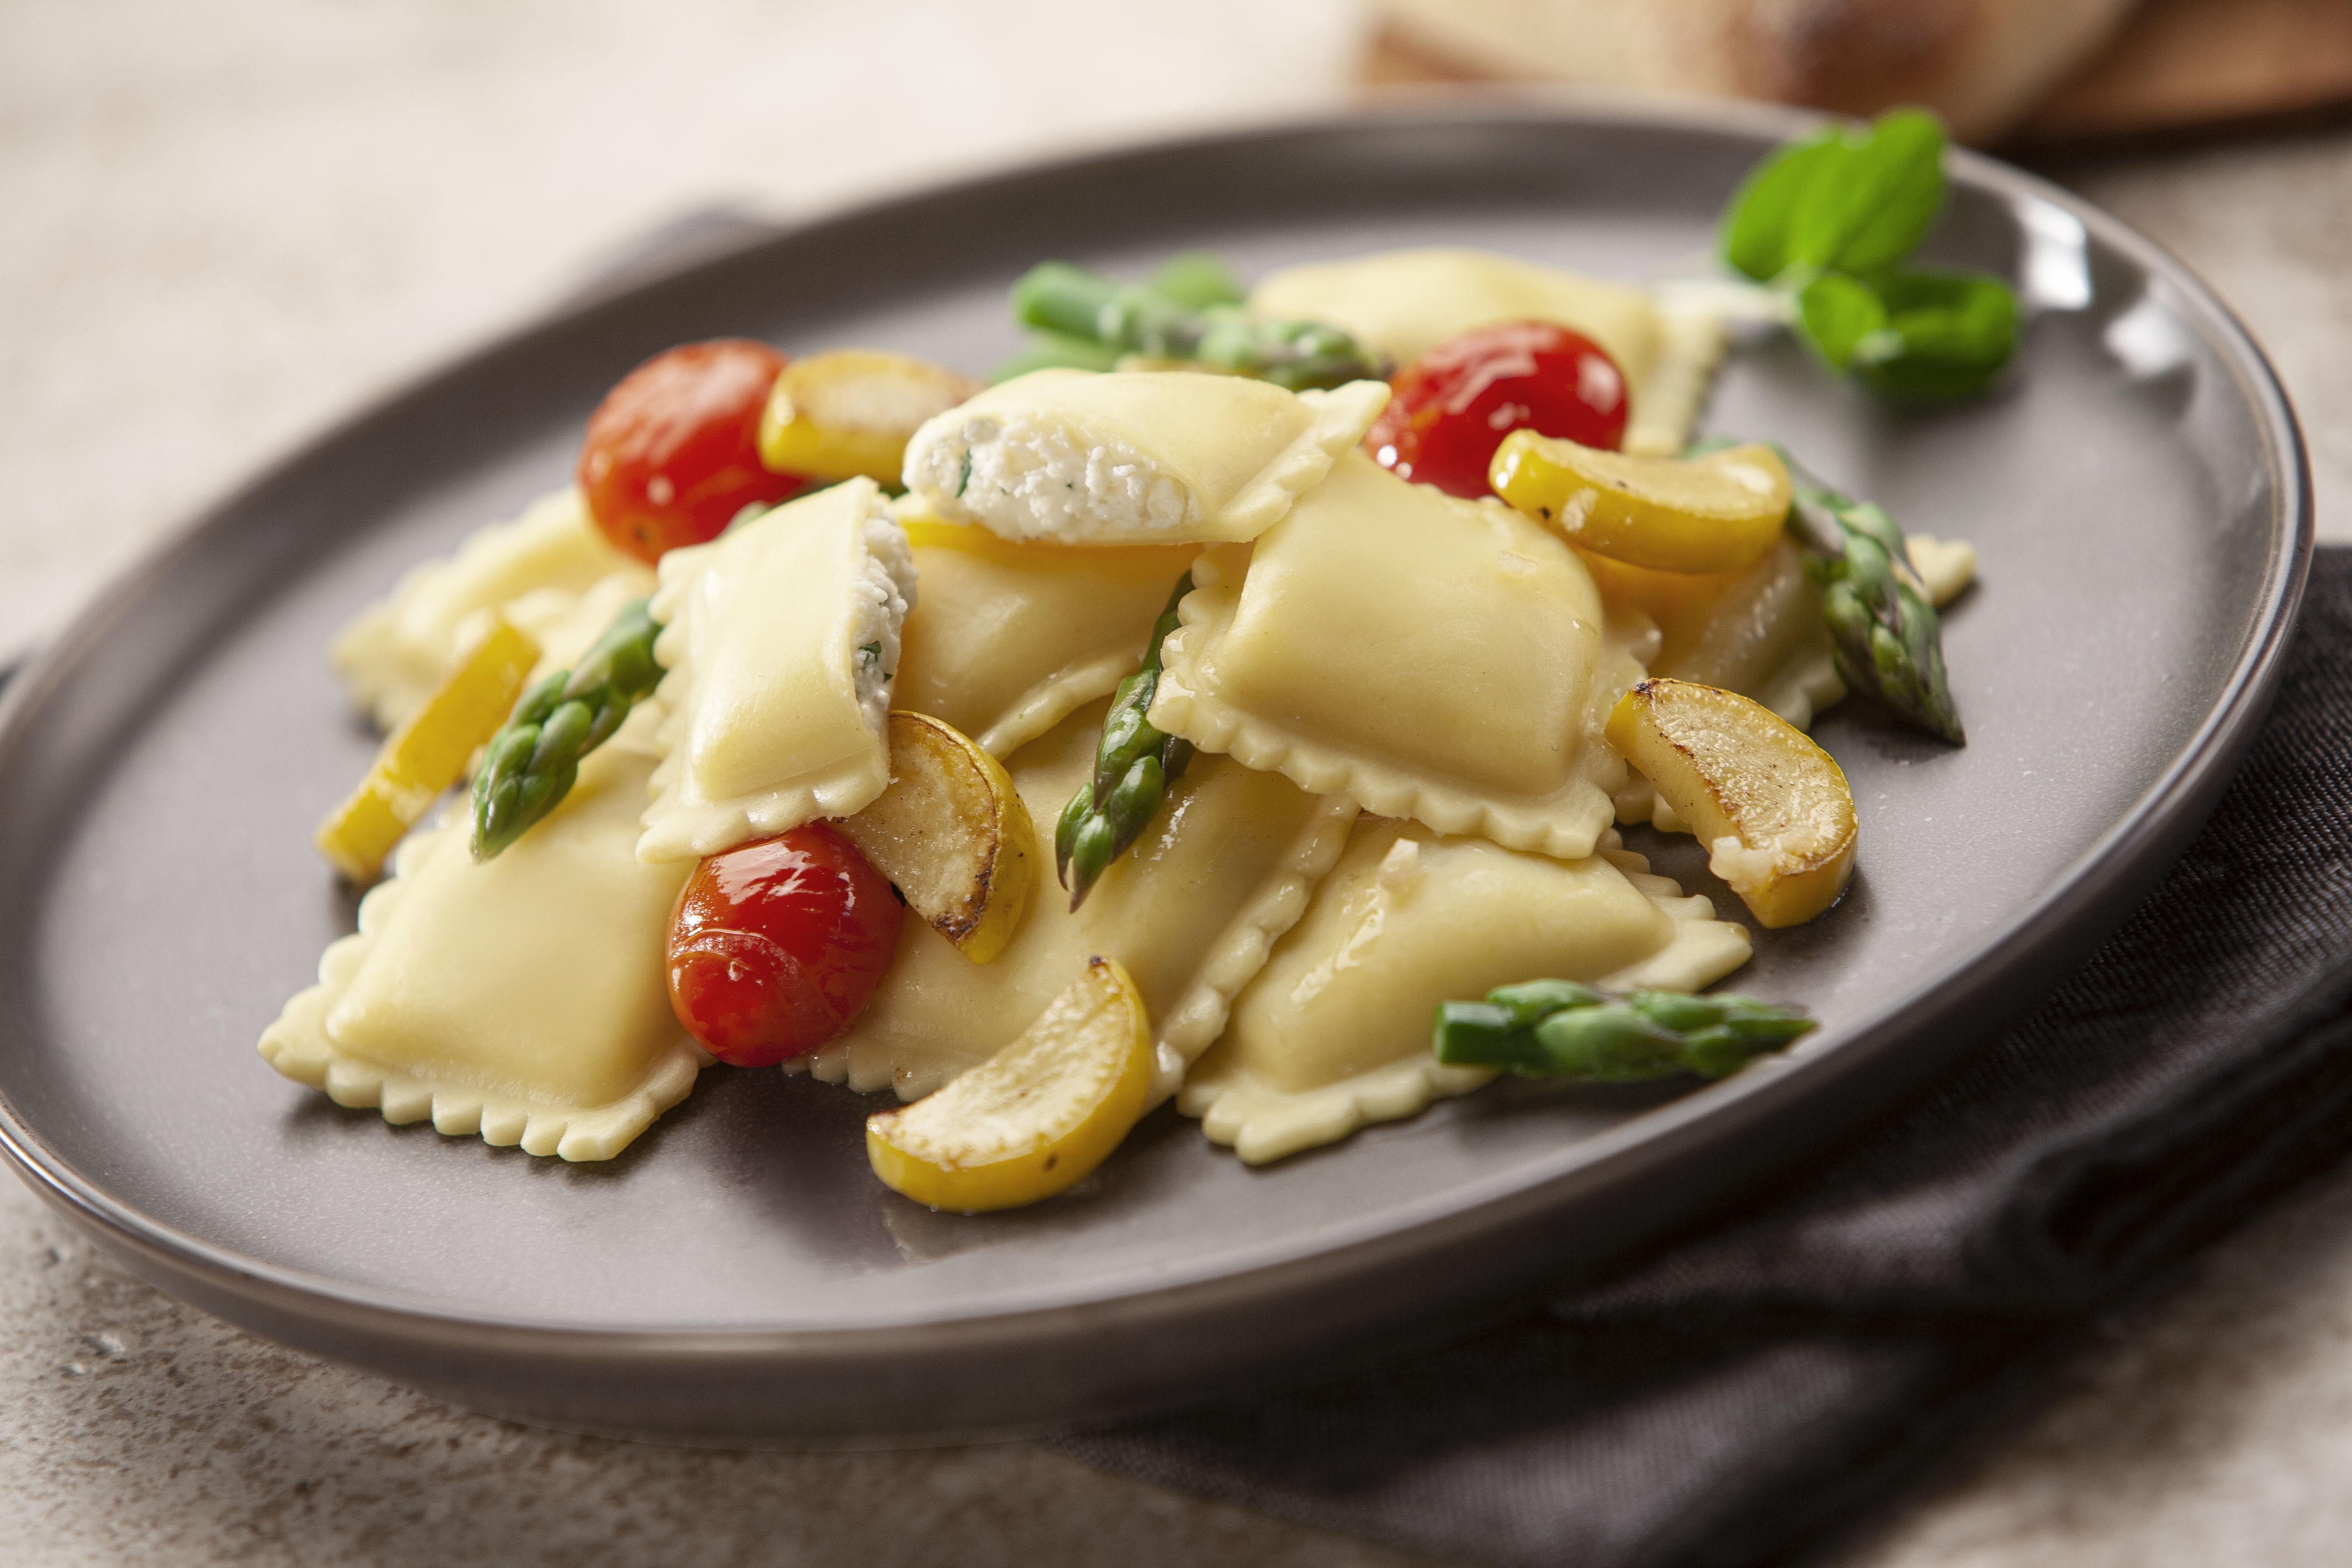 Four Cheese Ravioli with Asparagus and Cherry Tomatoes